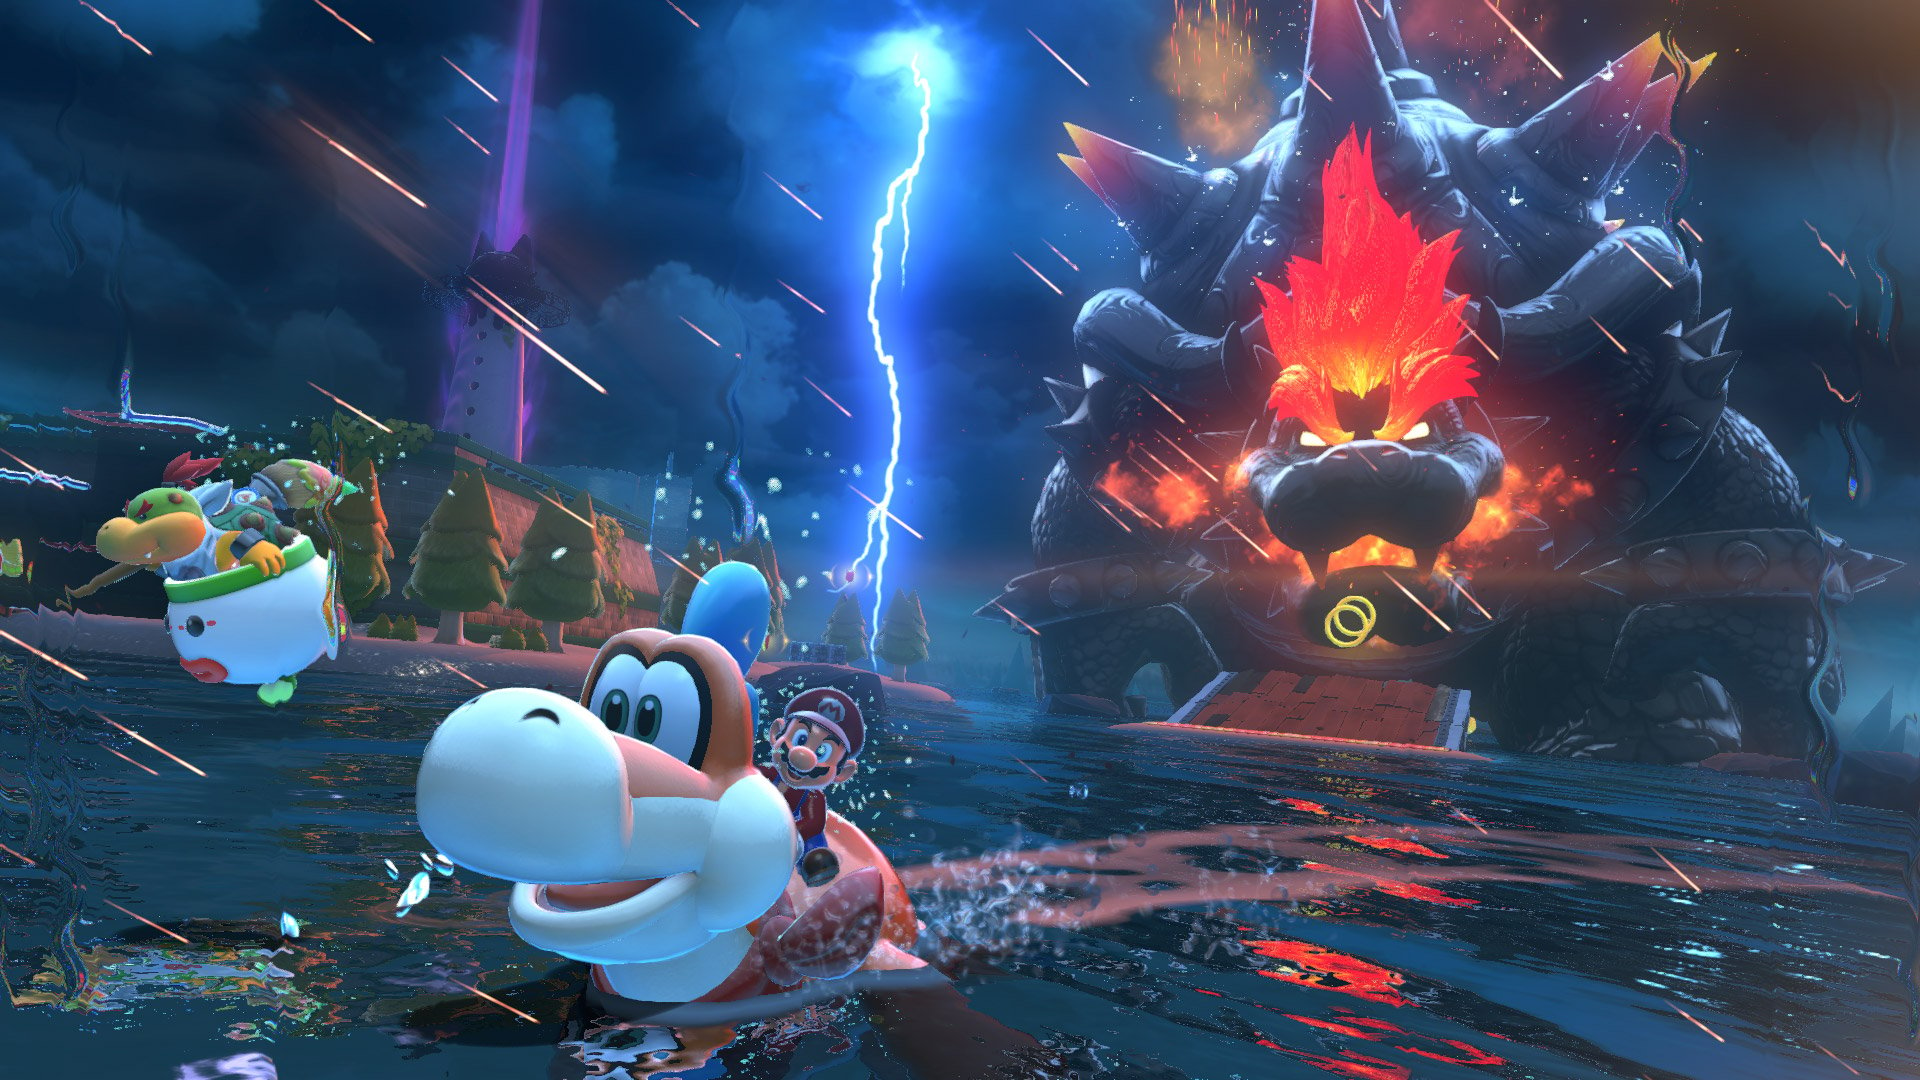 Bowser's Fury' adds open-world cat-themed hi-jinx to 'Super Mario